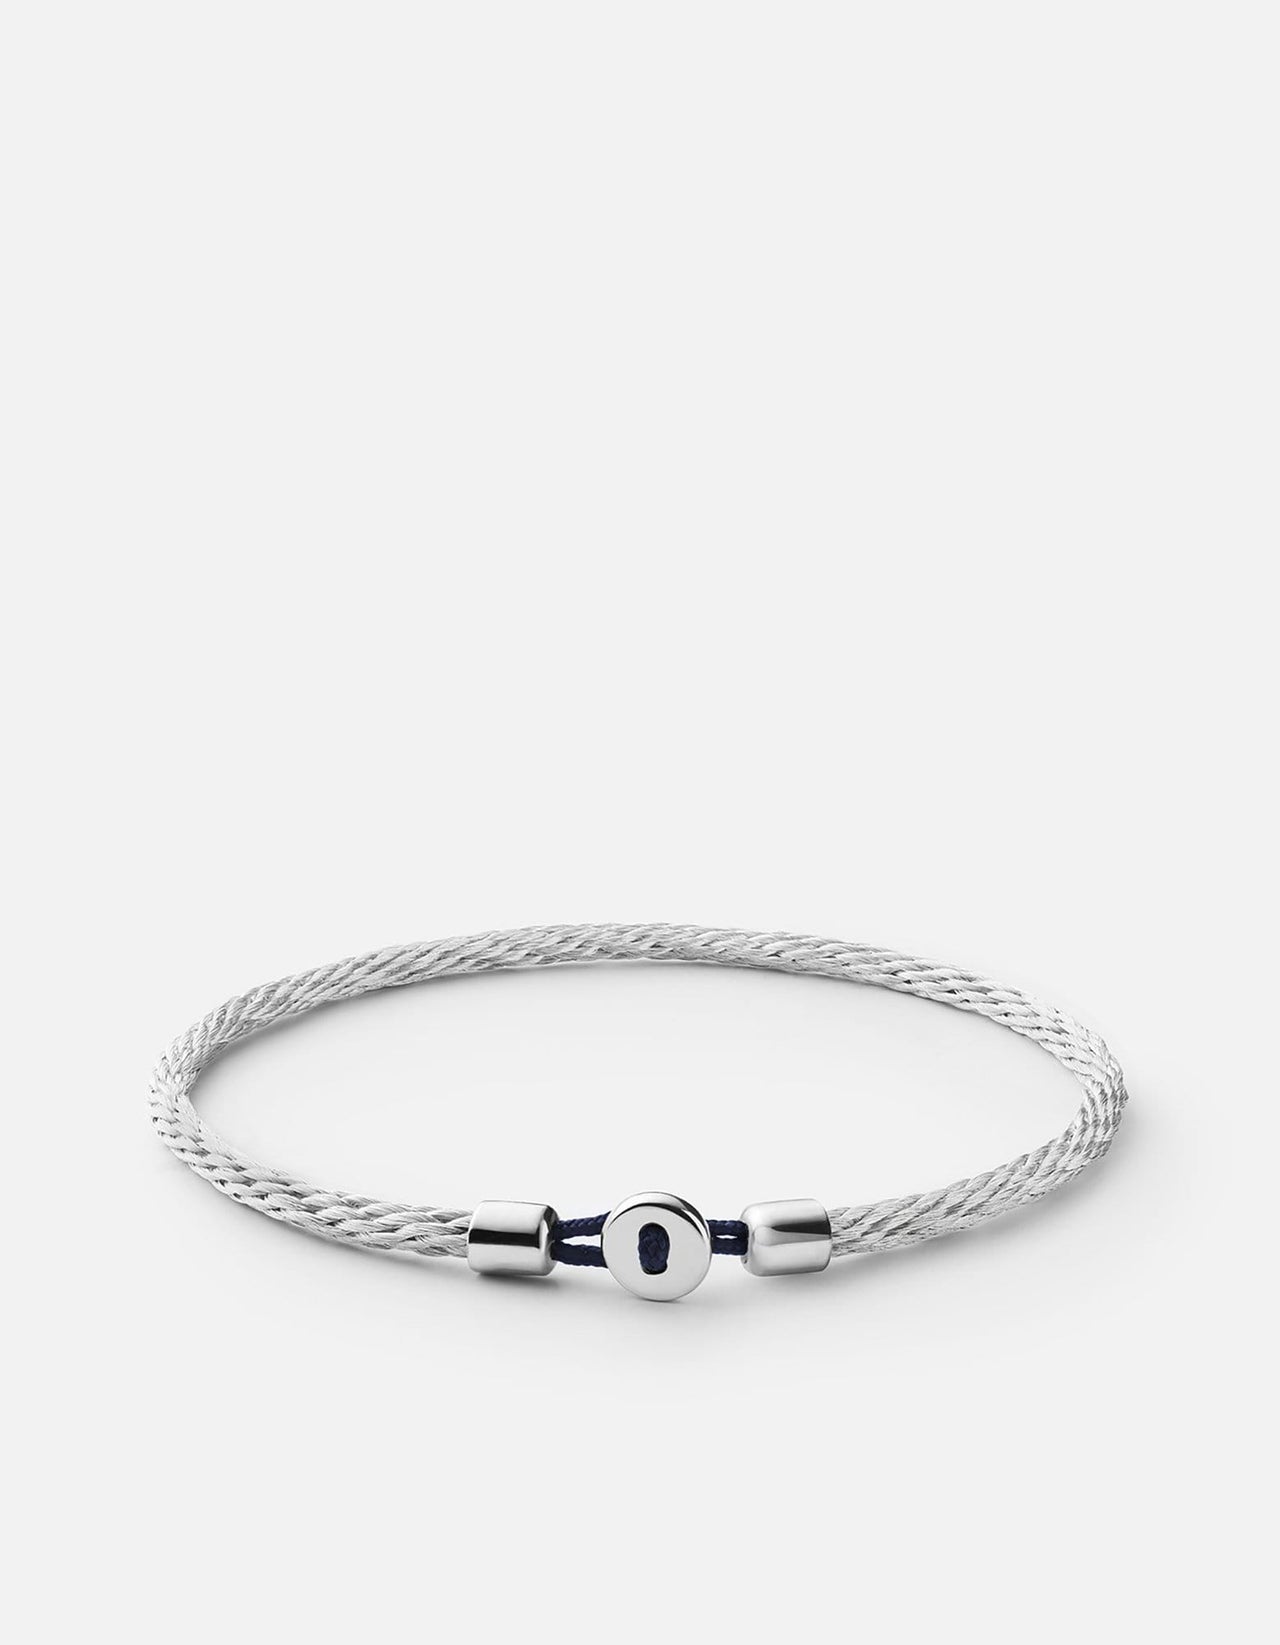 David Yurman Cable Bracelet with Gemstone and 14K Gold in Silver 7mm   Neiman Marcus